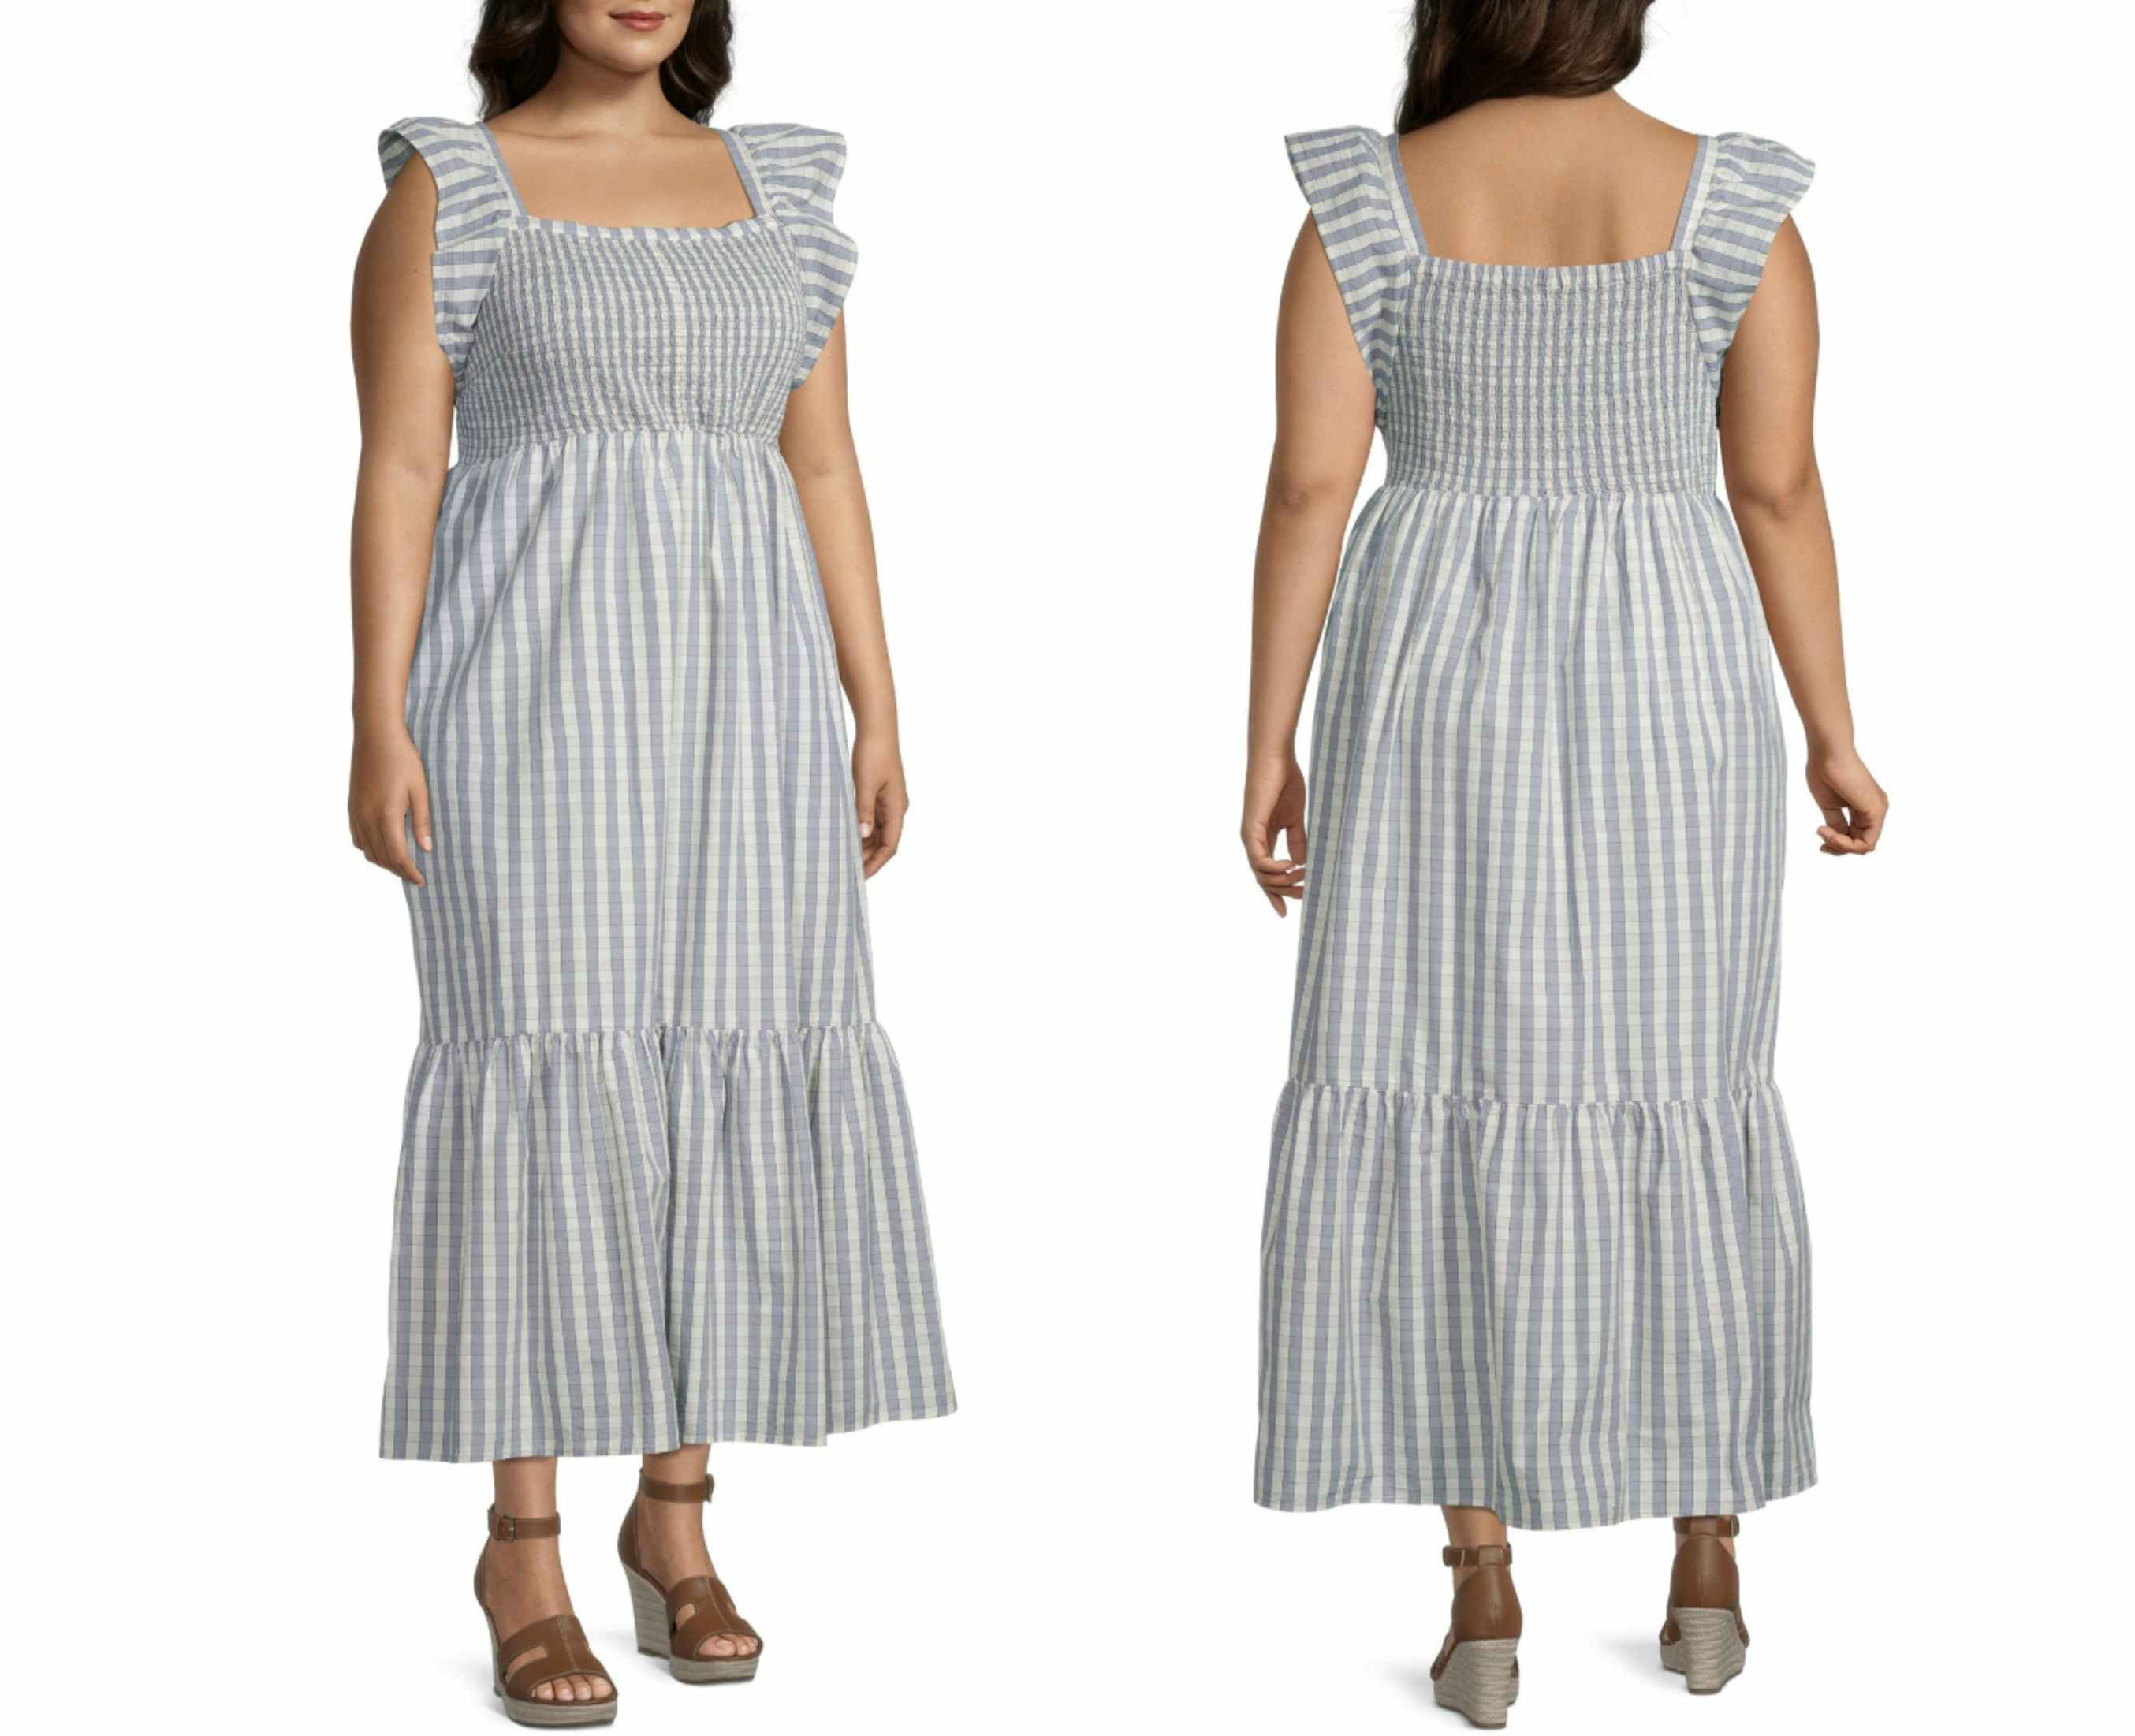 A JCPenney model wearing an a.n.a Plus Short Sleeve Plaid Maxi Dress on a white background.